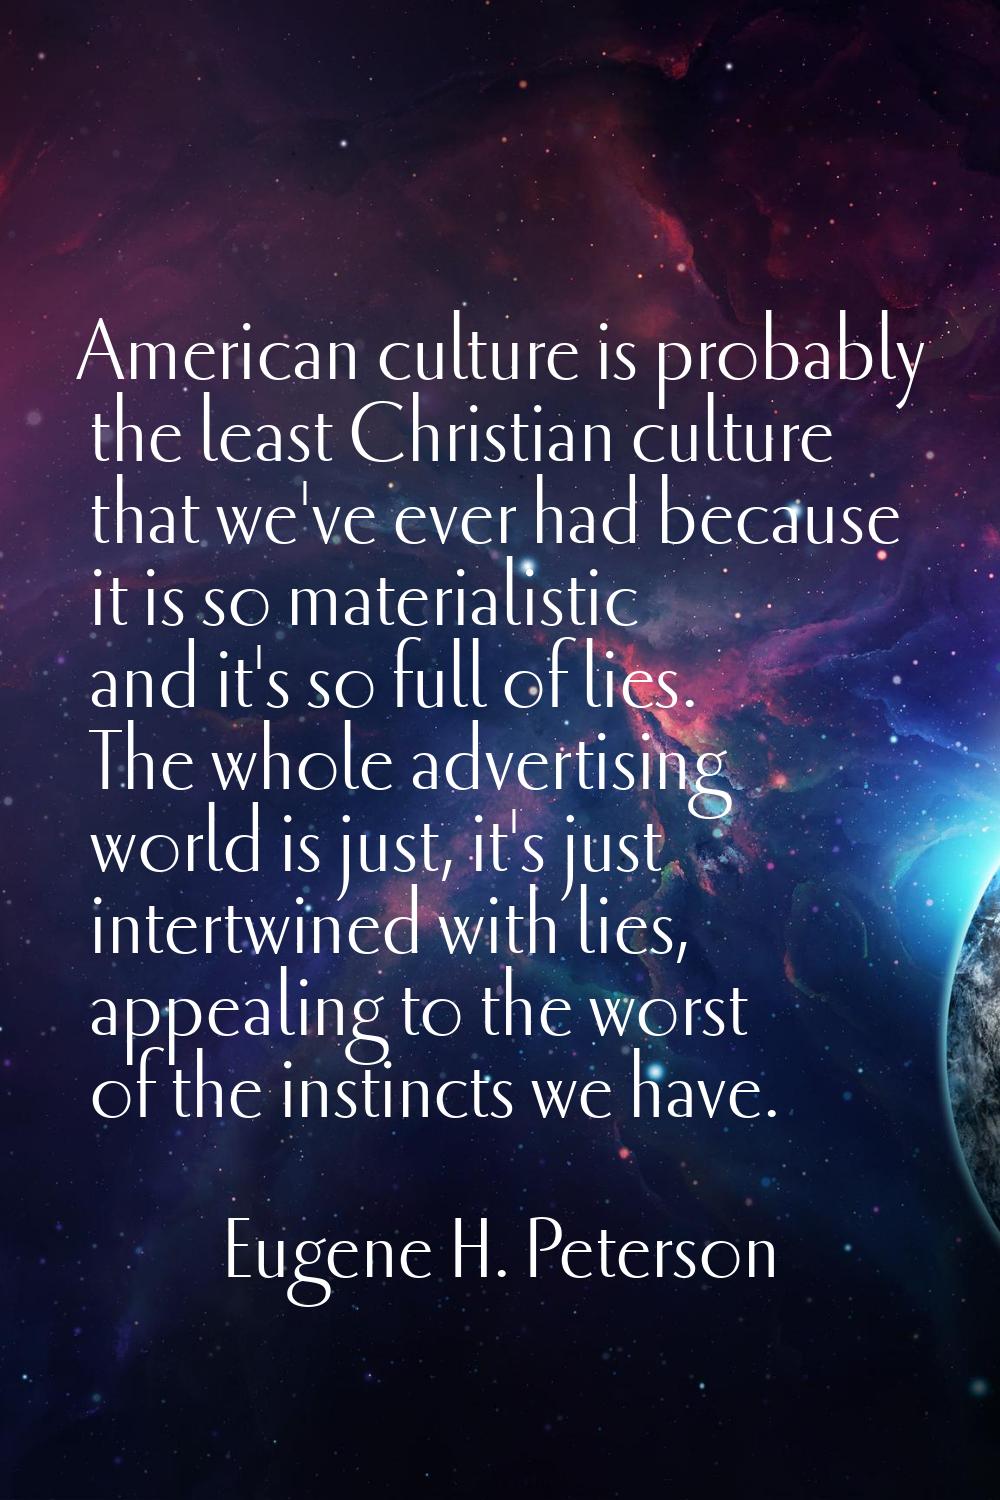 American culture is probably the least Christian culture that we've ever had because it is so mater